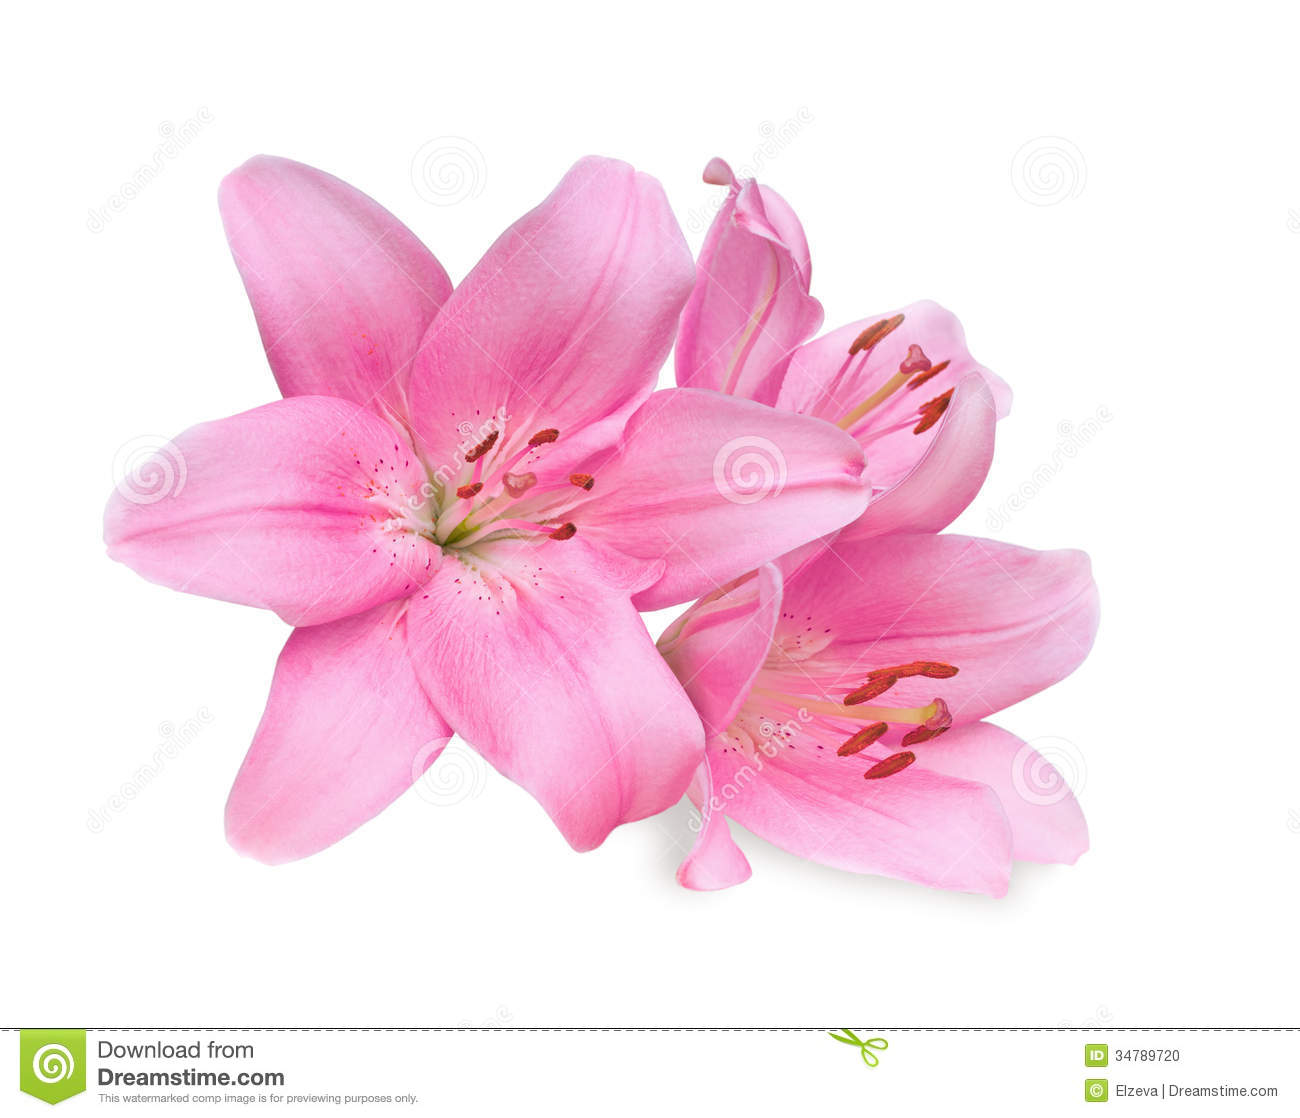 Pink Lilies On White Background Stock Photo   Image  34789720